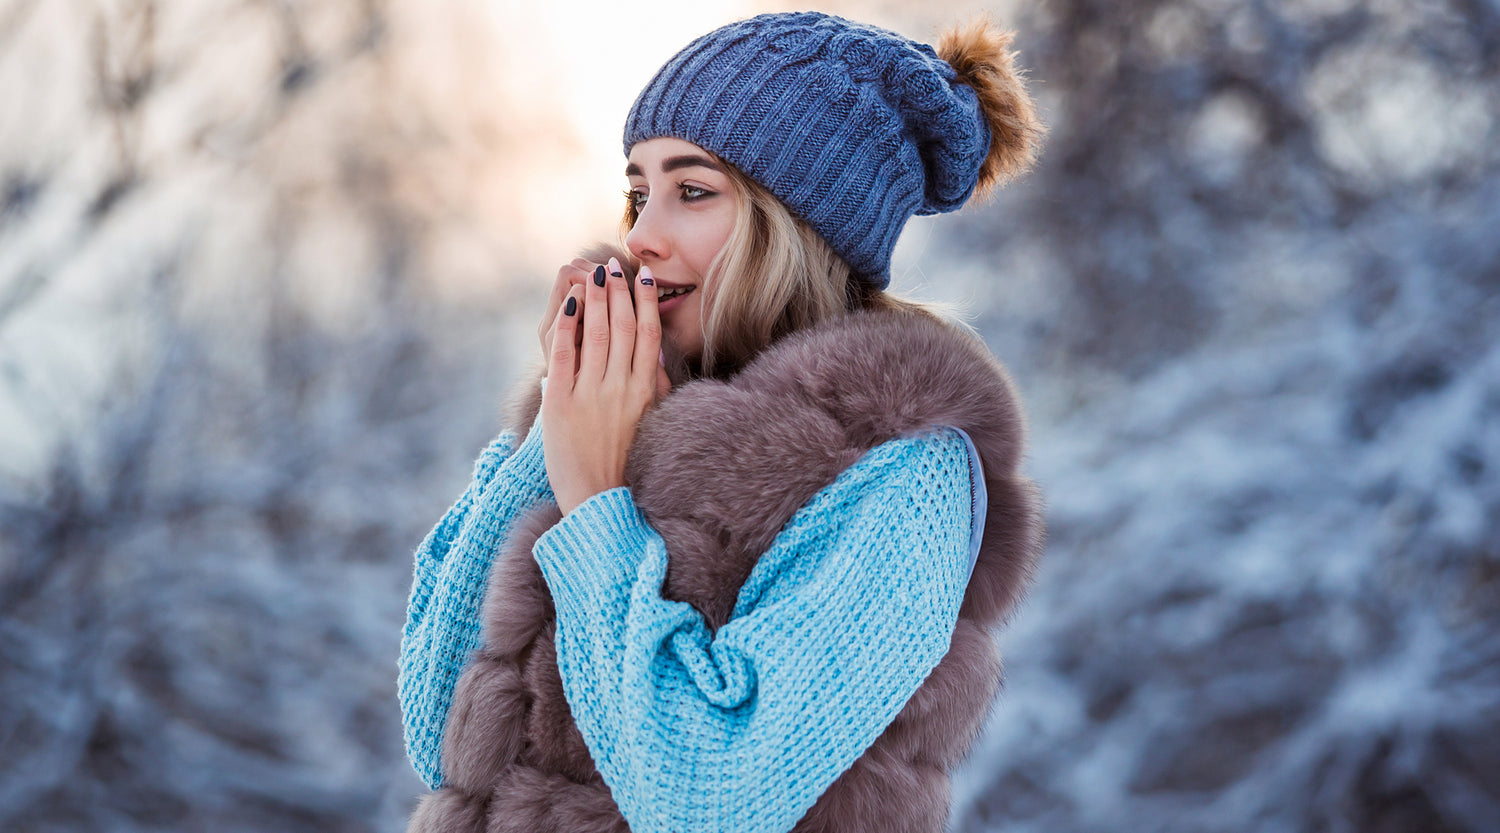 How to Keep Oily Skin Moisturized in Winter: 4 Important Tips